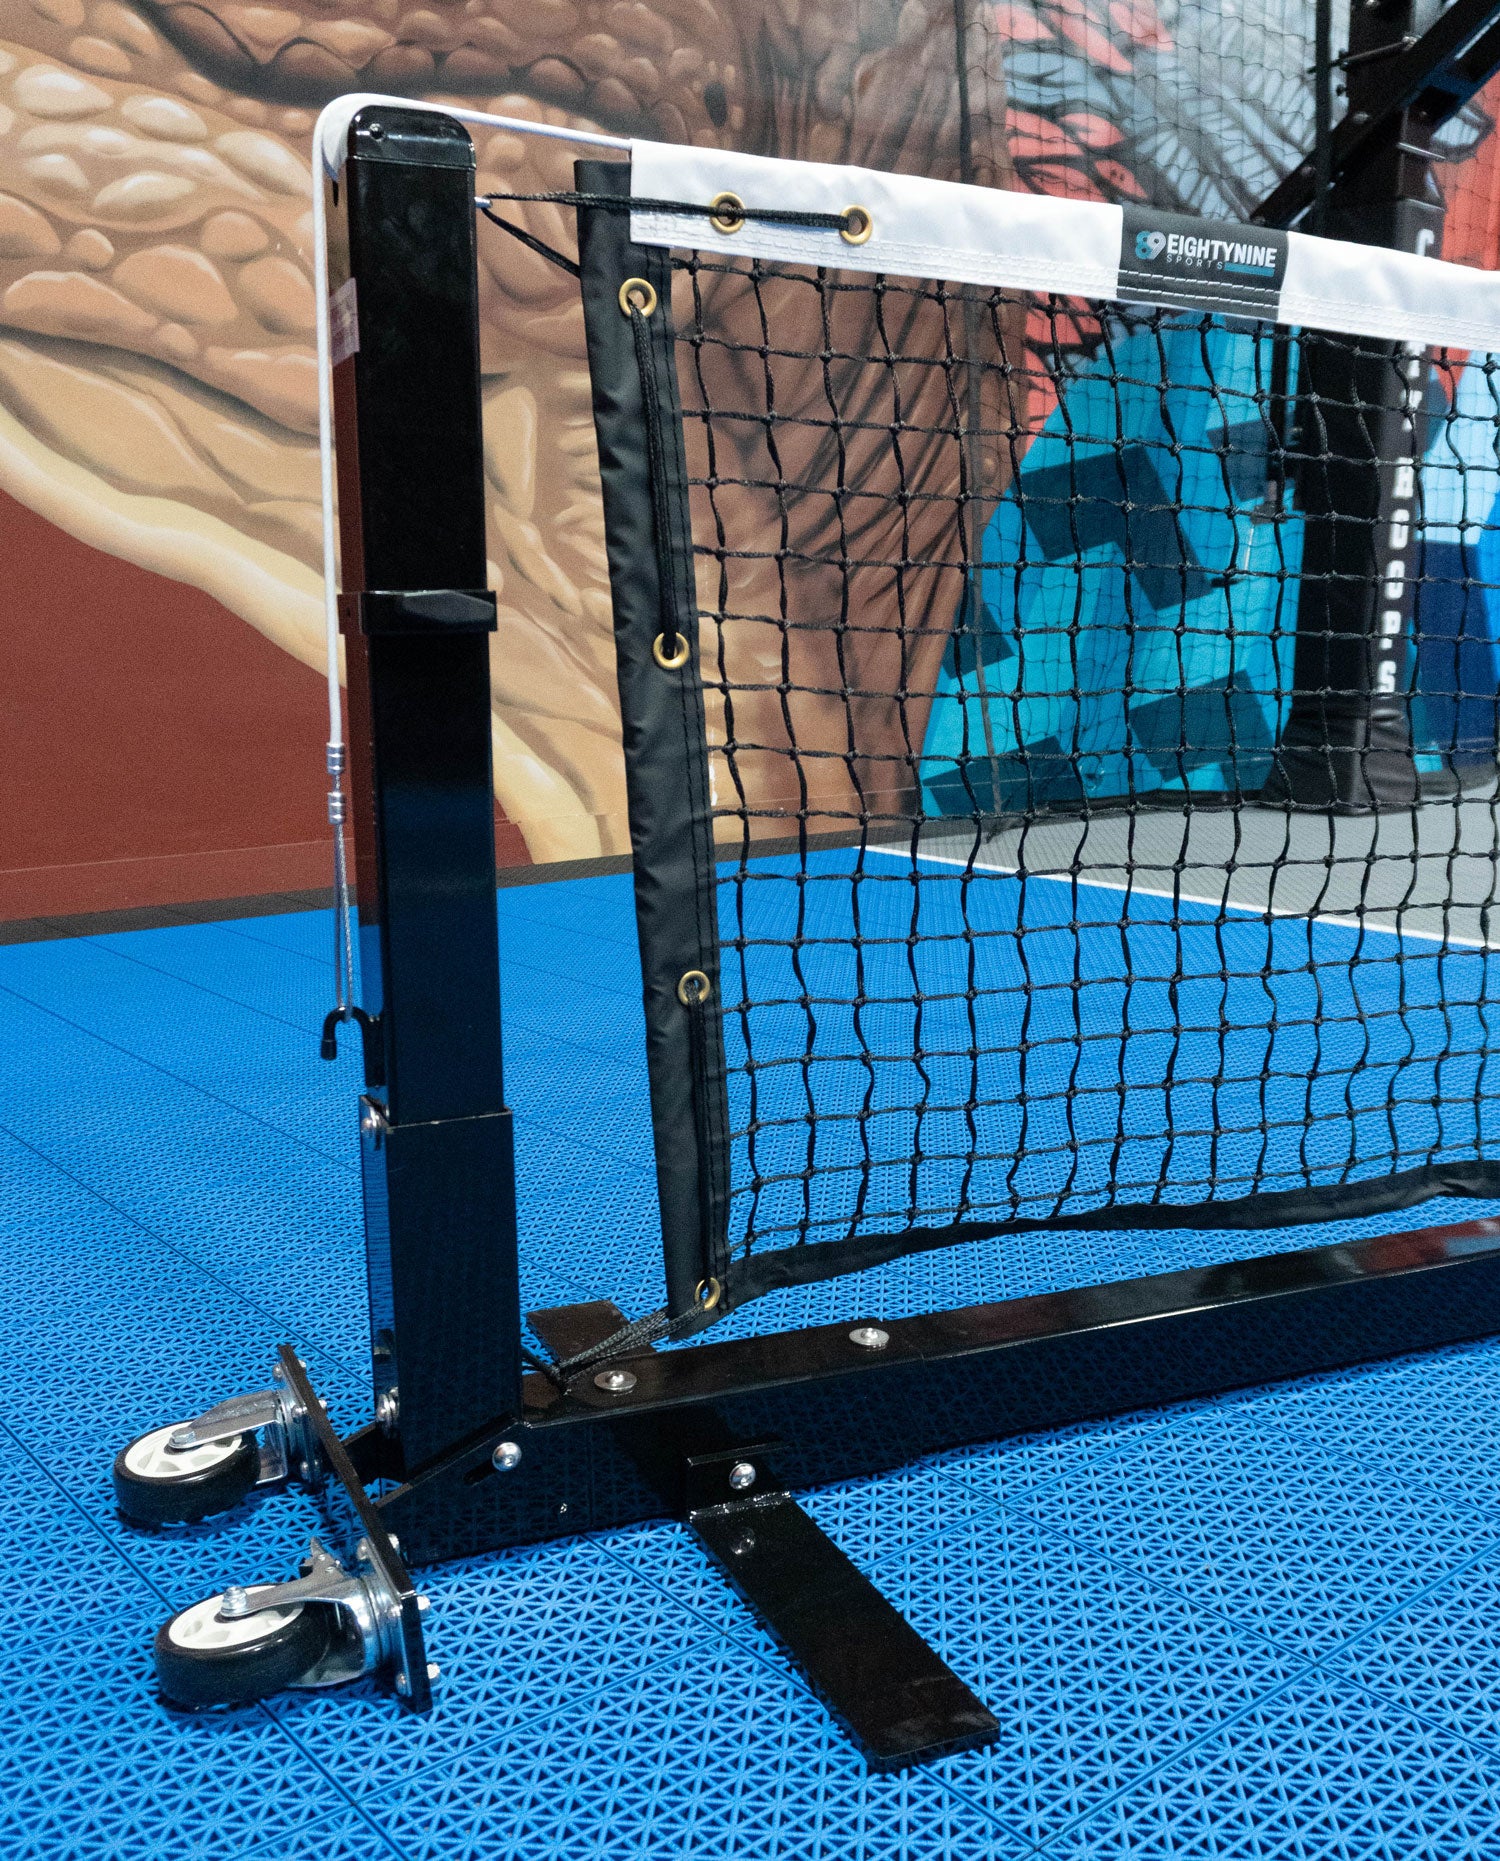 EIGHTYNINE Sports - Professional Portable Pickleball Net System - DIY Court Canada